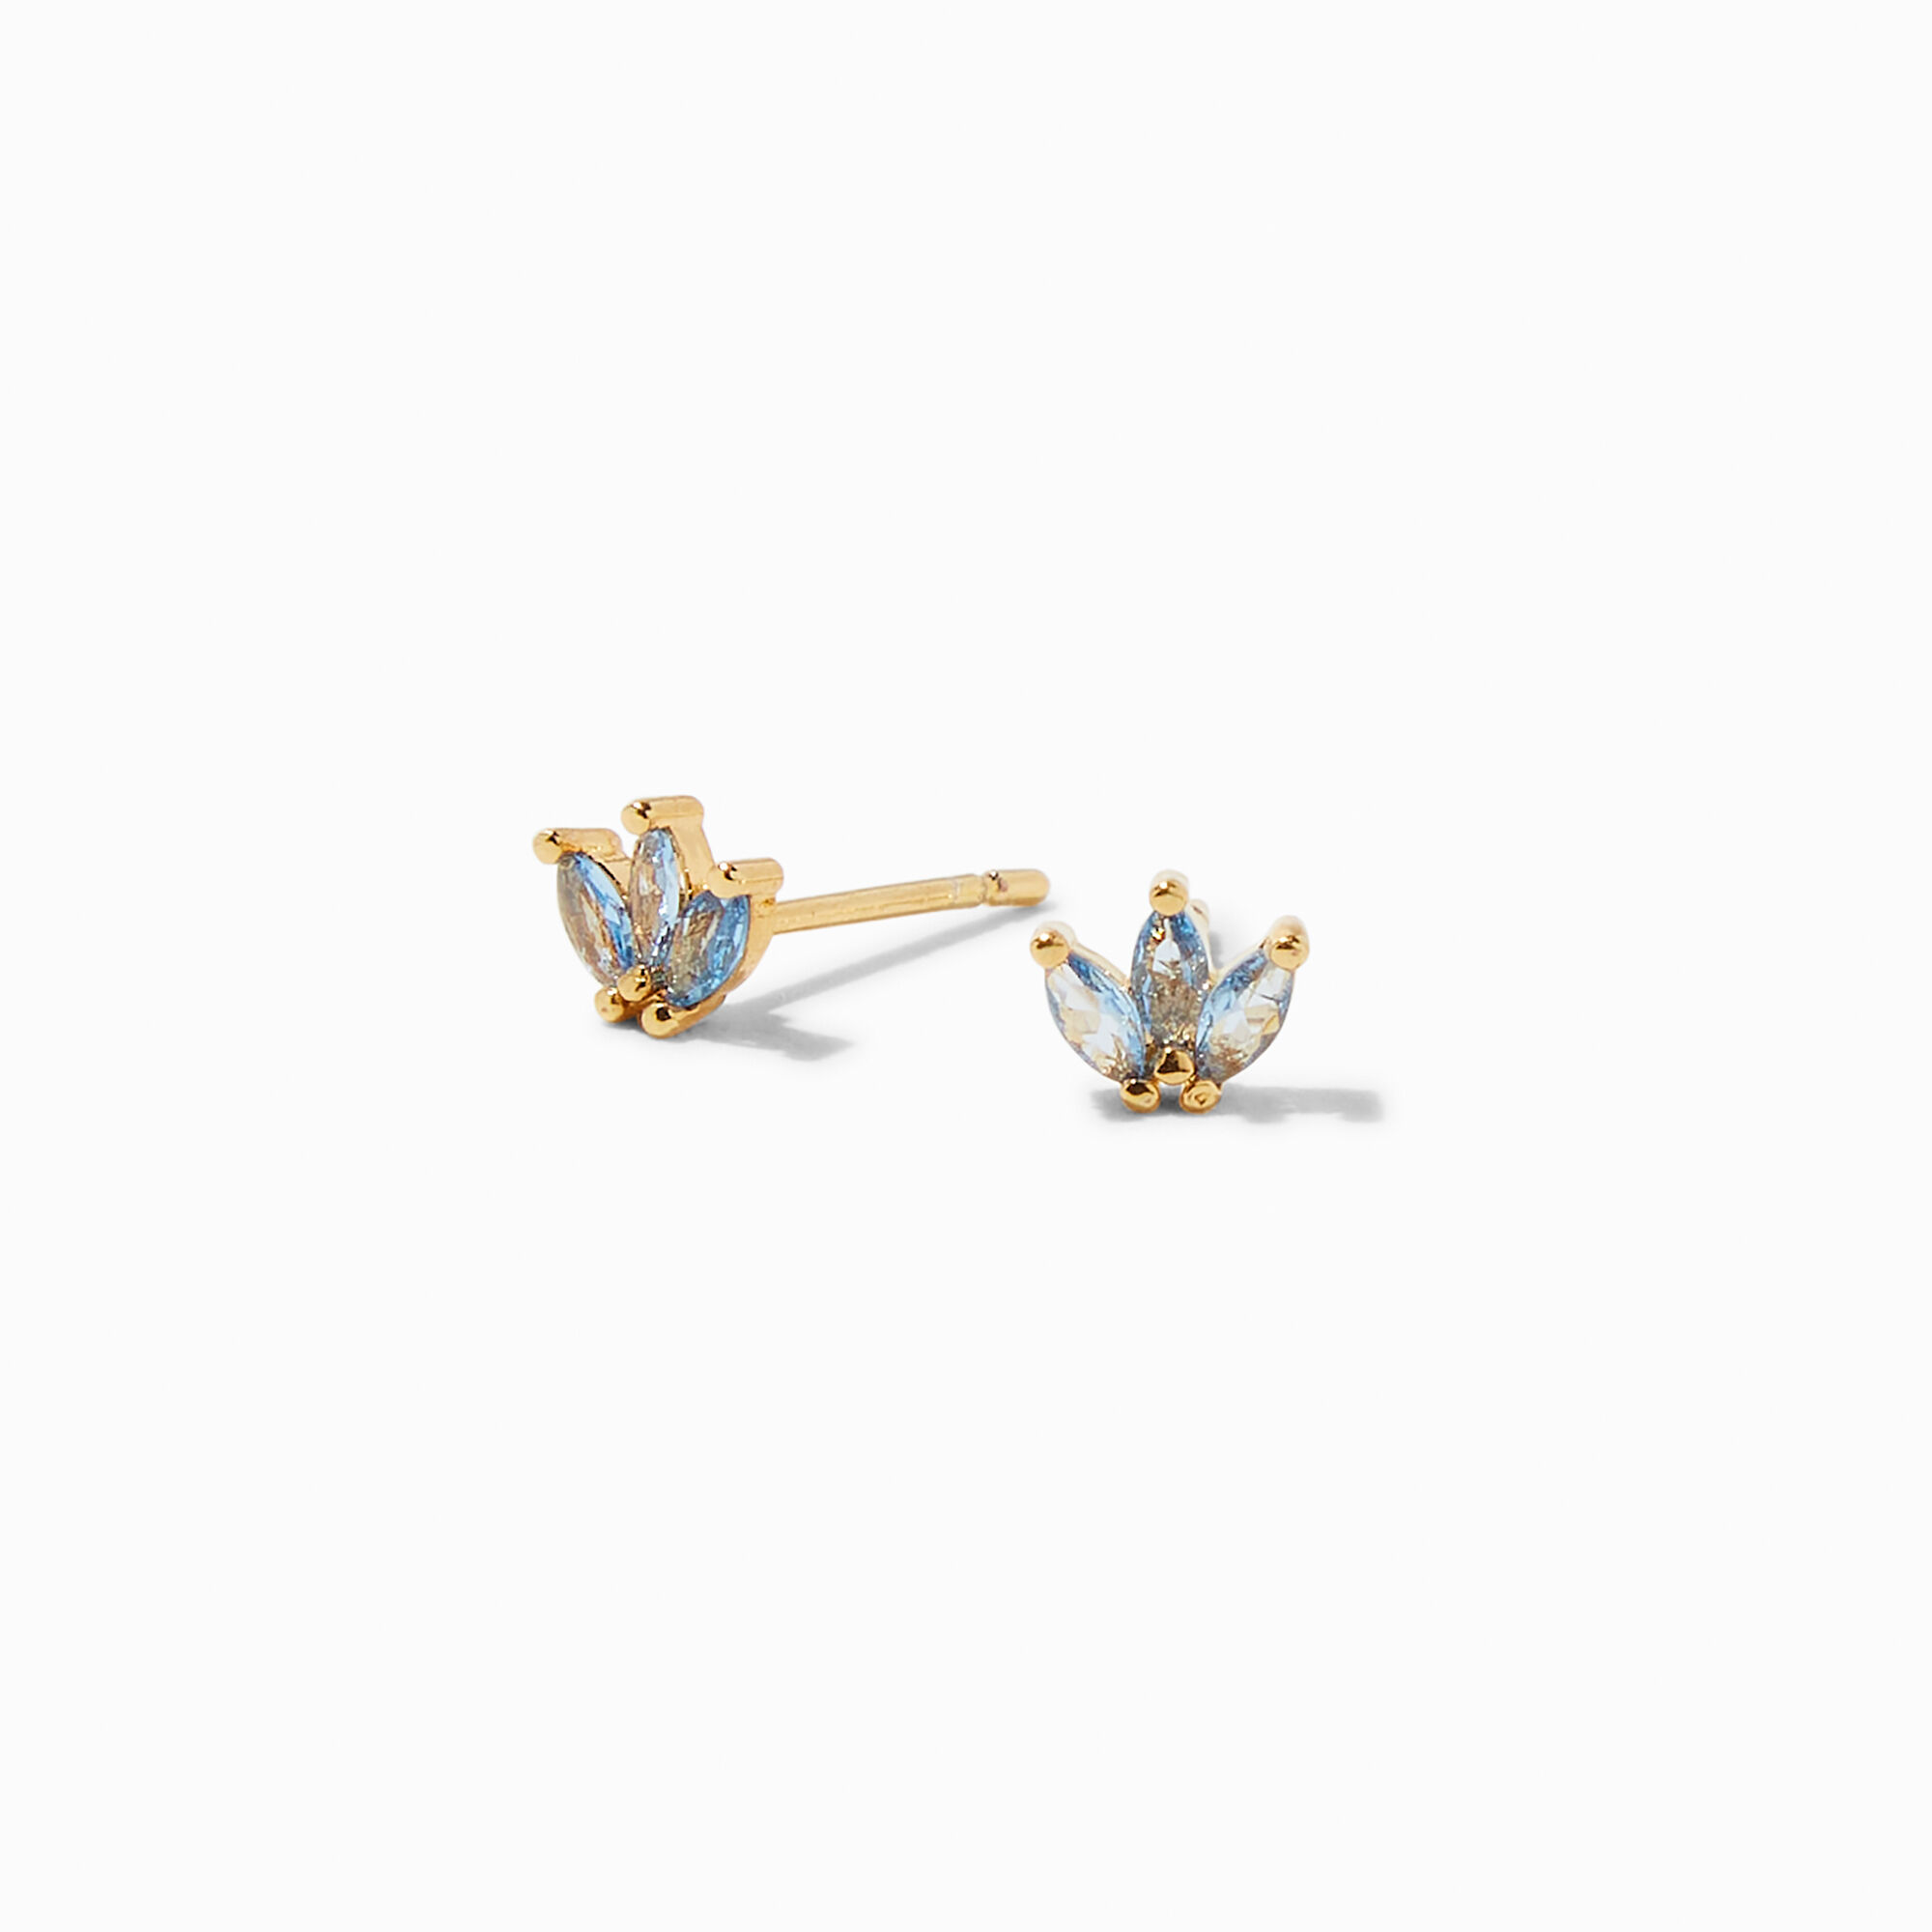 View C Luxe By Claires 18K Gold Plated Aqua Cubic Zirconia Petal Stud Earrings Yellow information